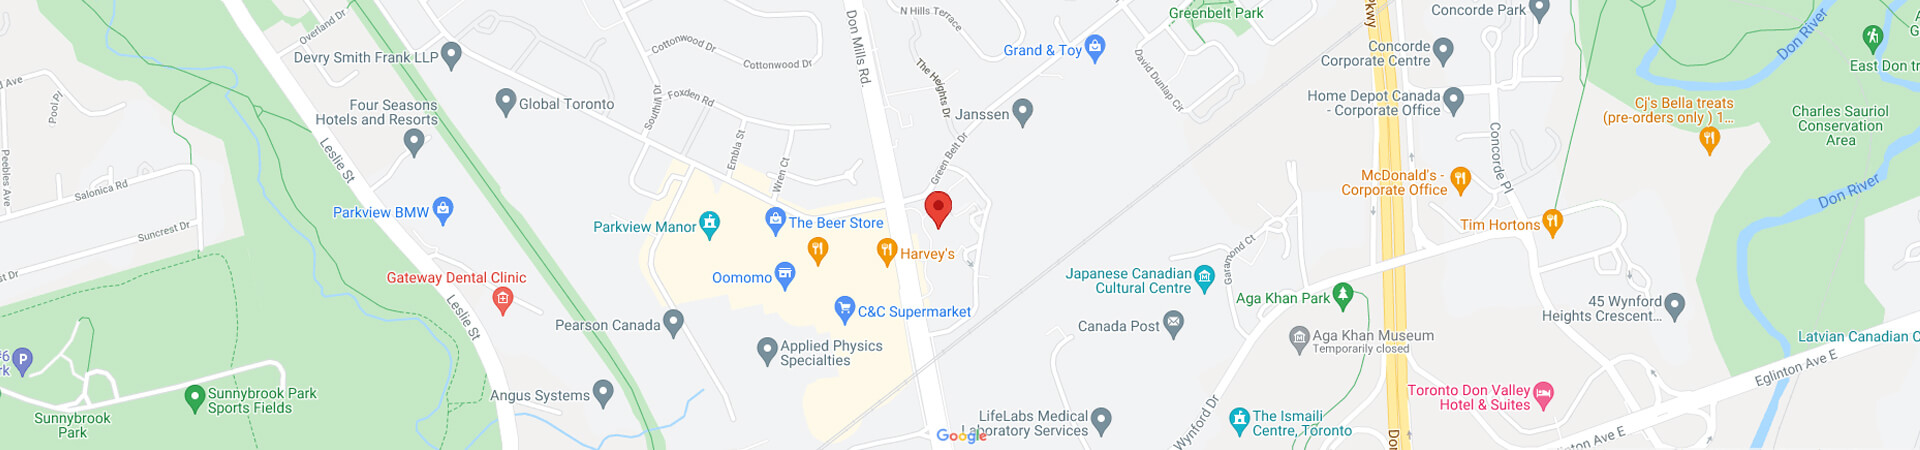 Google map image: 895 Don Mills Road,Two Morneau Shepell Centre, Suite 900,Toronto, ON, M3C 1W3, Canada